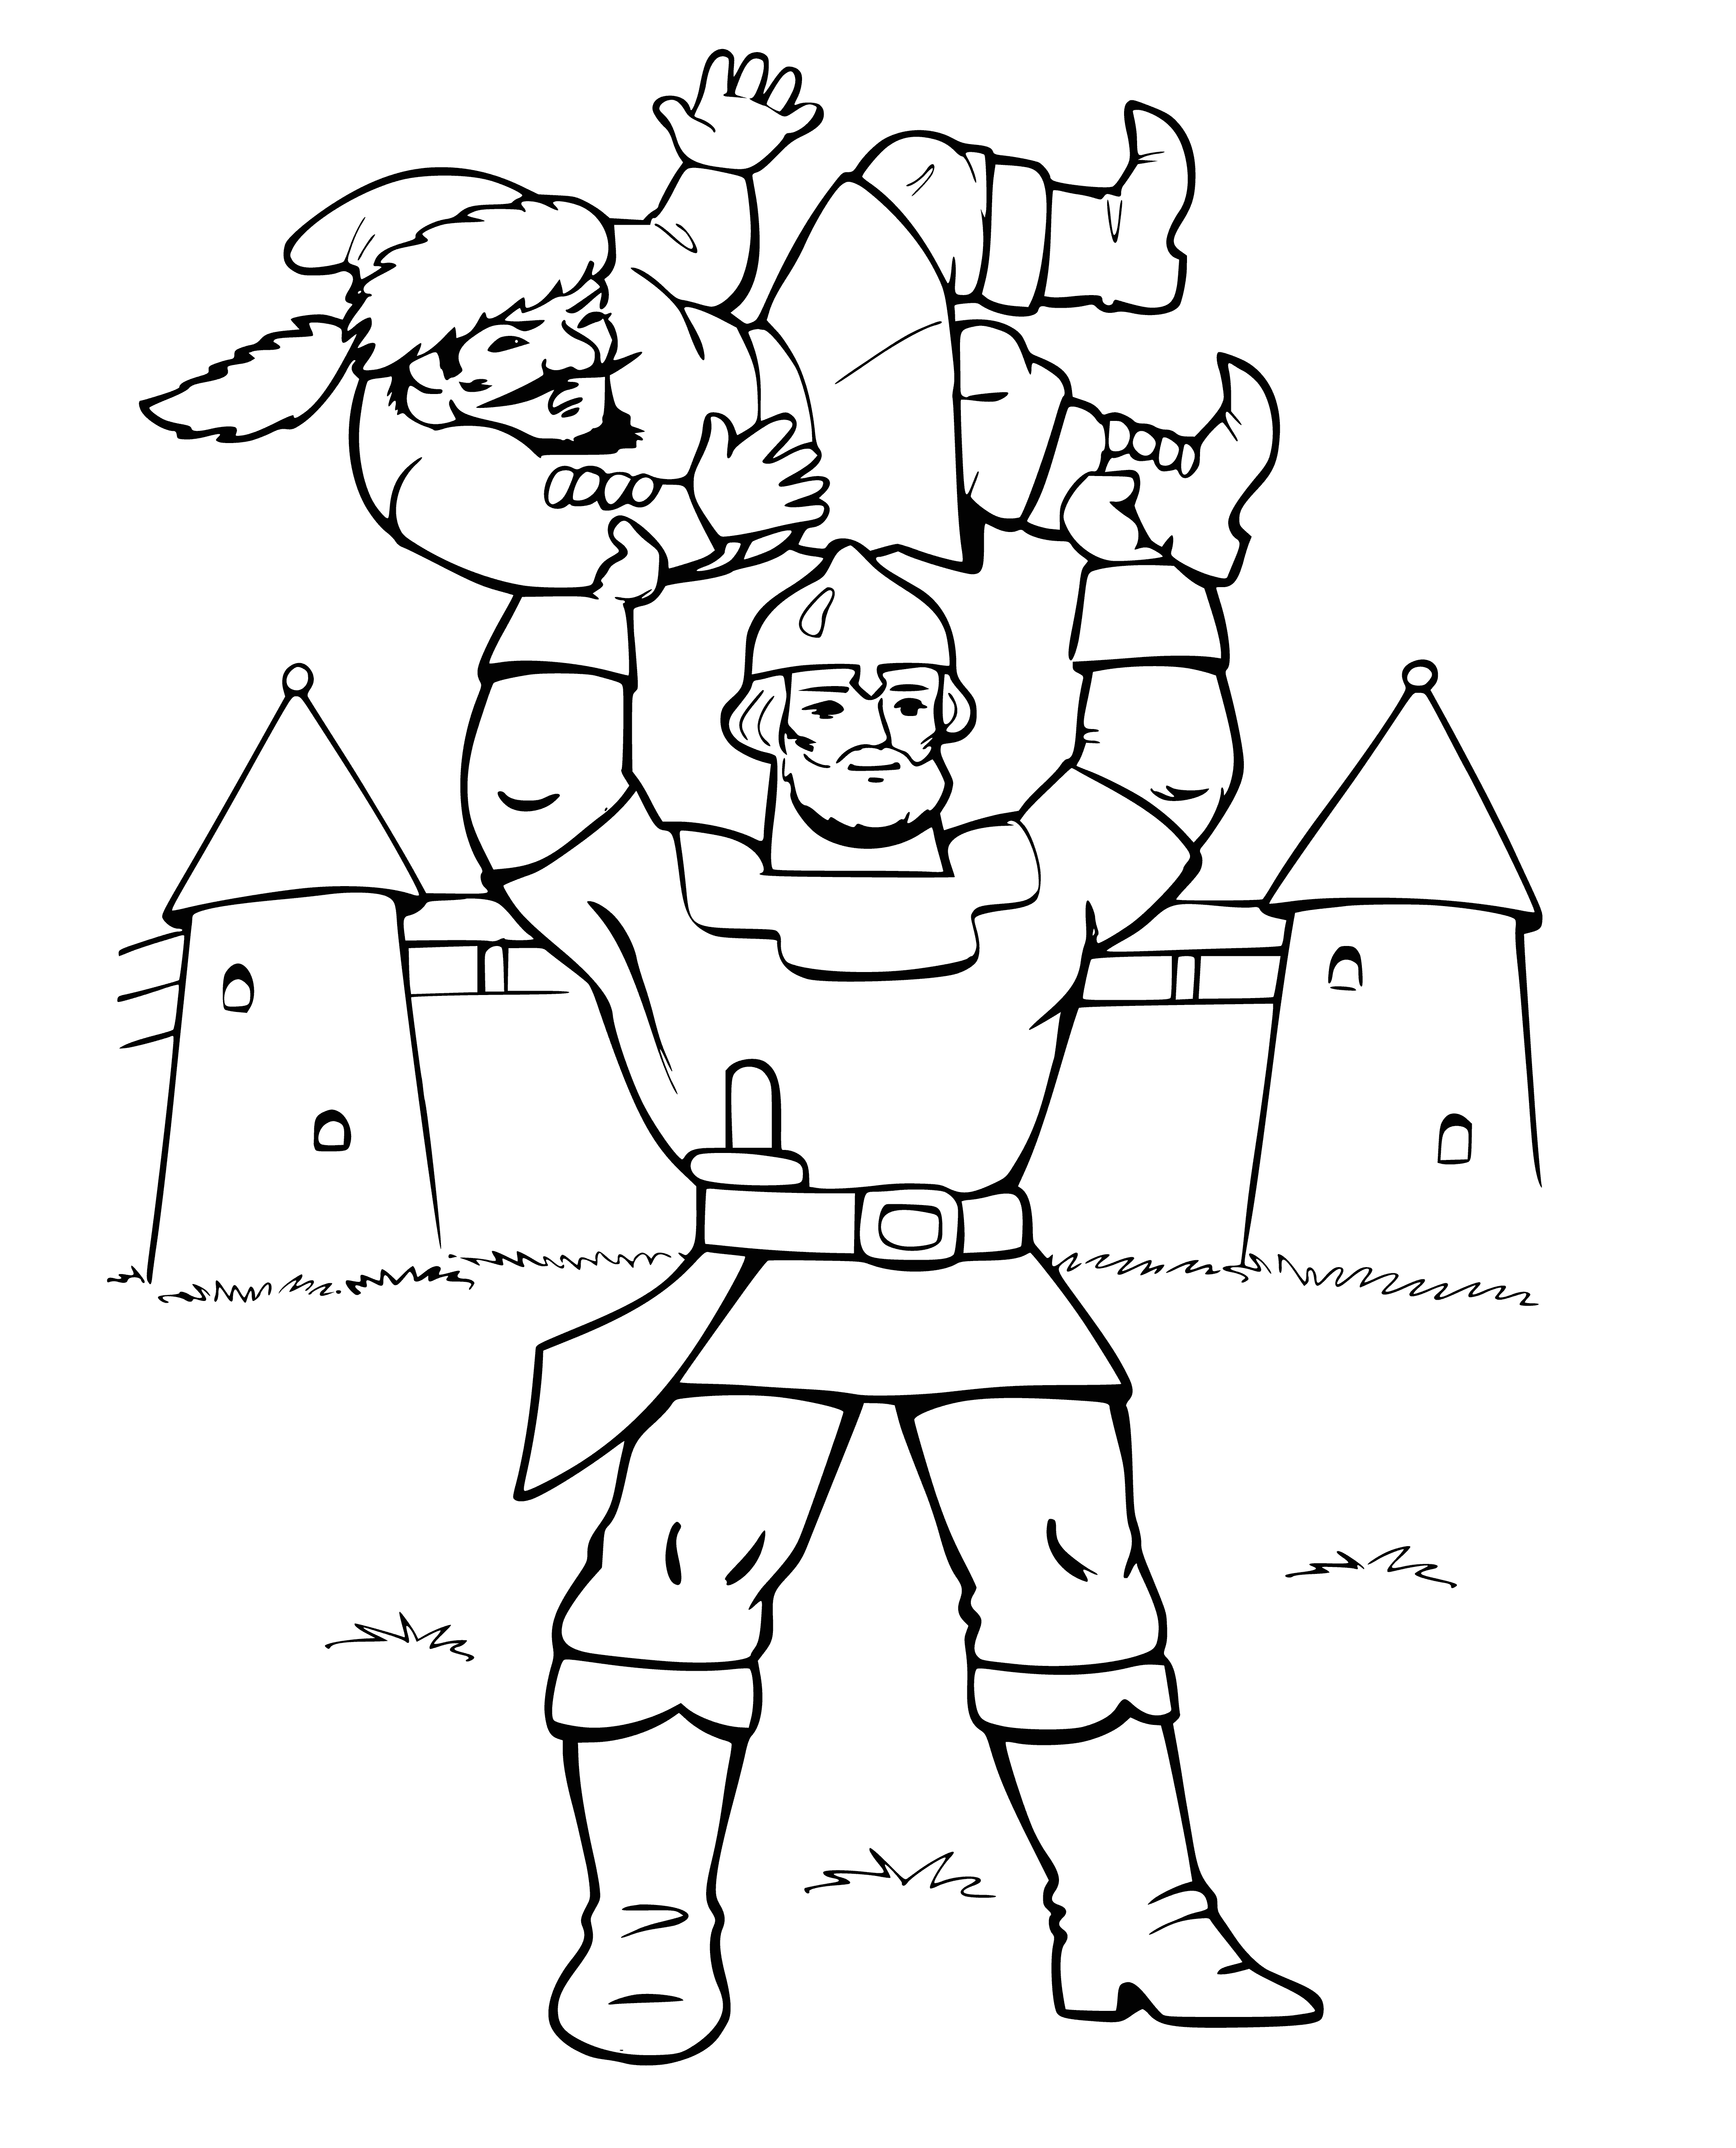 Ilya is very strong coloring page